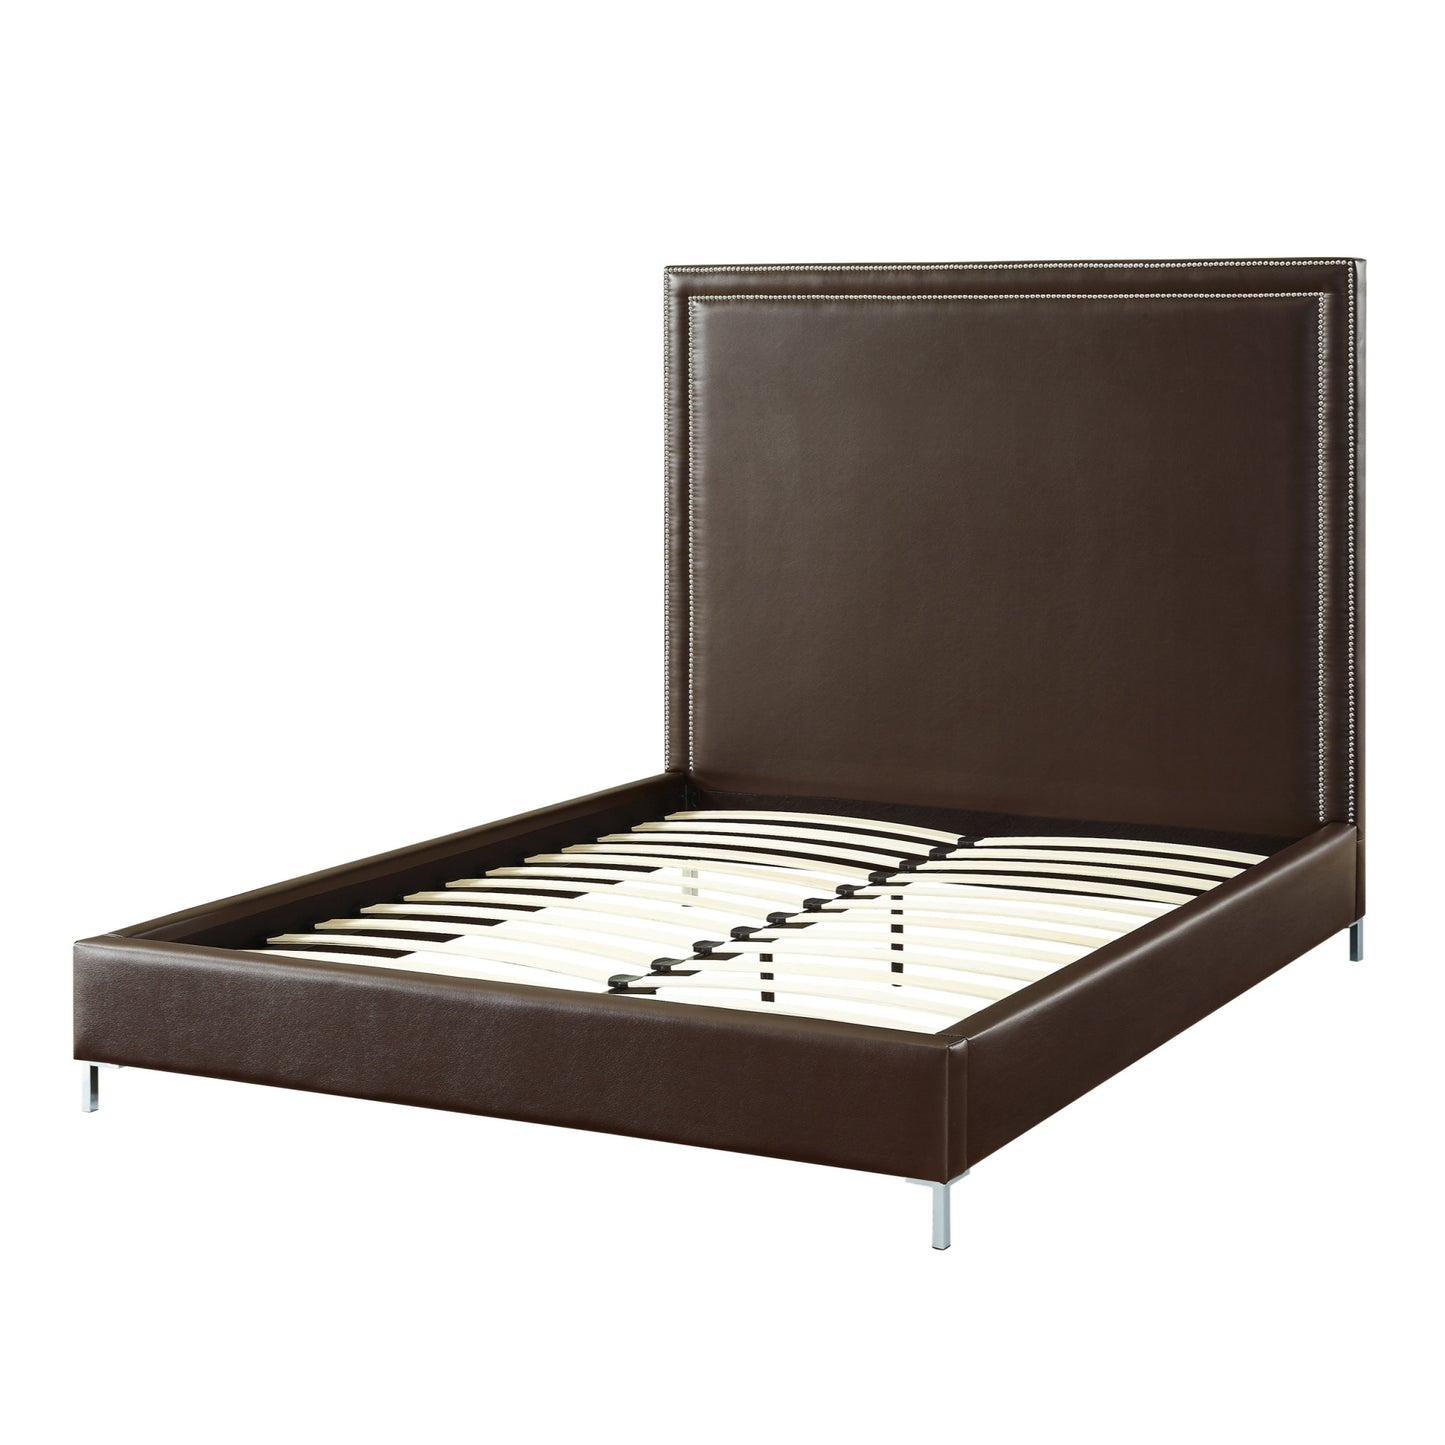 Espresso Solid Wood King Upholstered Faux Leather Bed with Nailhead Trim